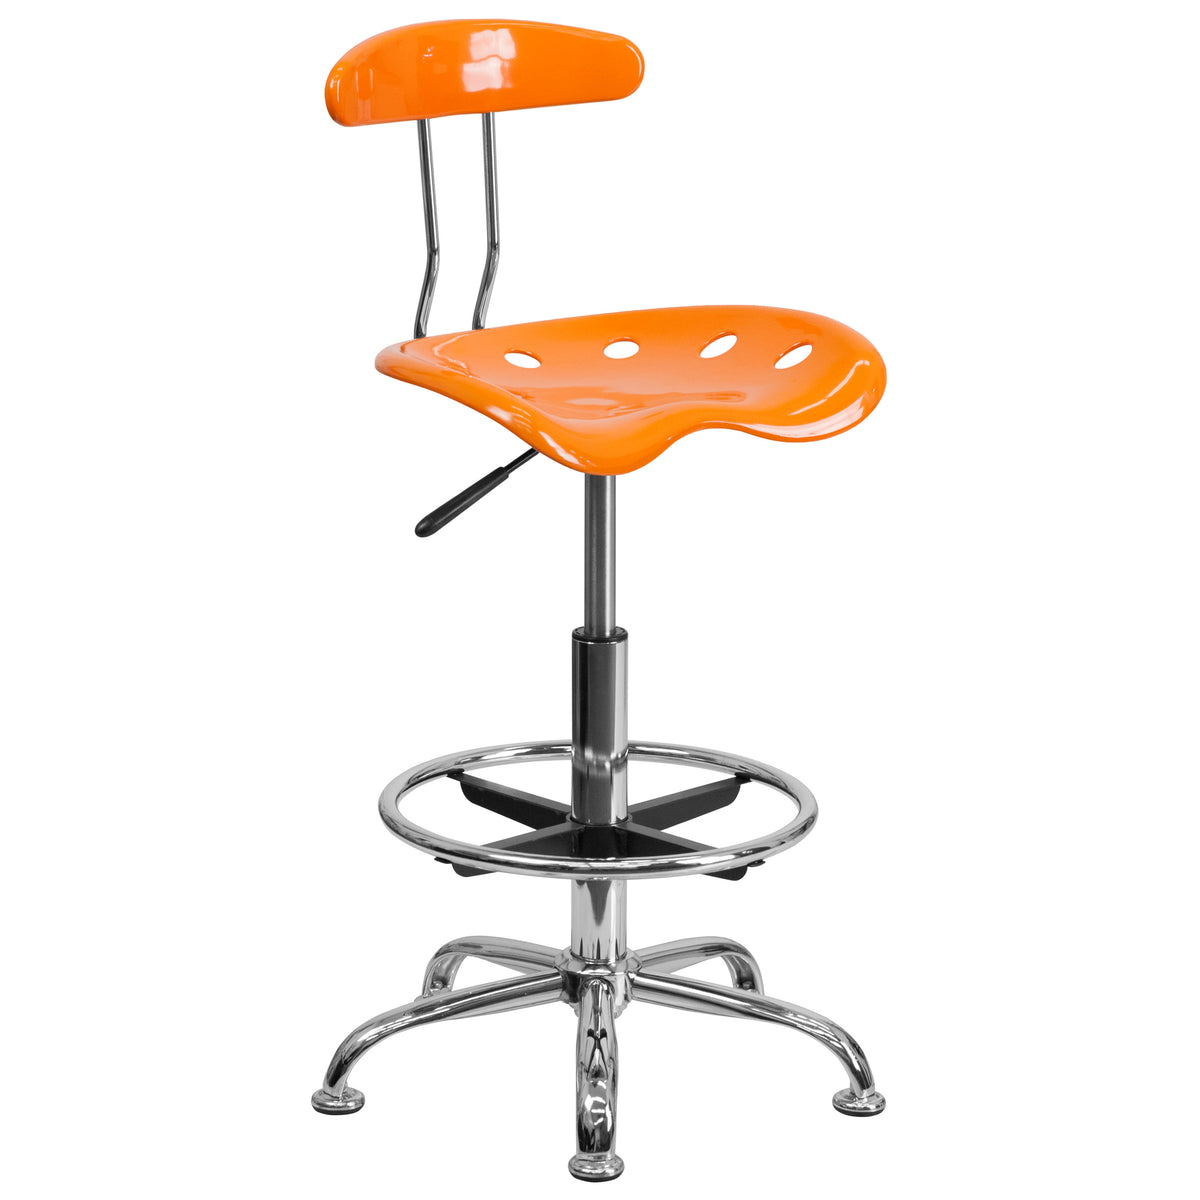 Orange |#| Vibrant Orange and Chrome Drafting Stool with Tractor Seat